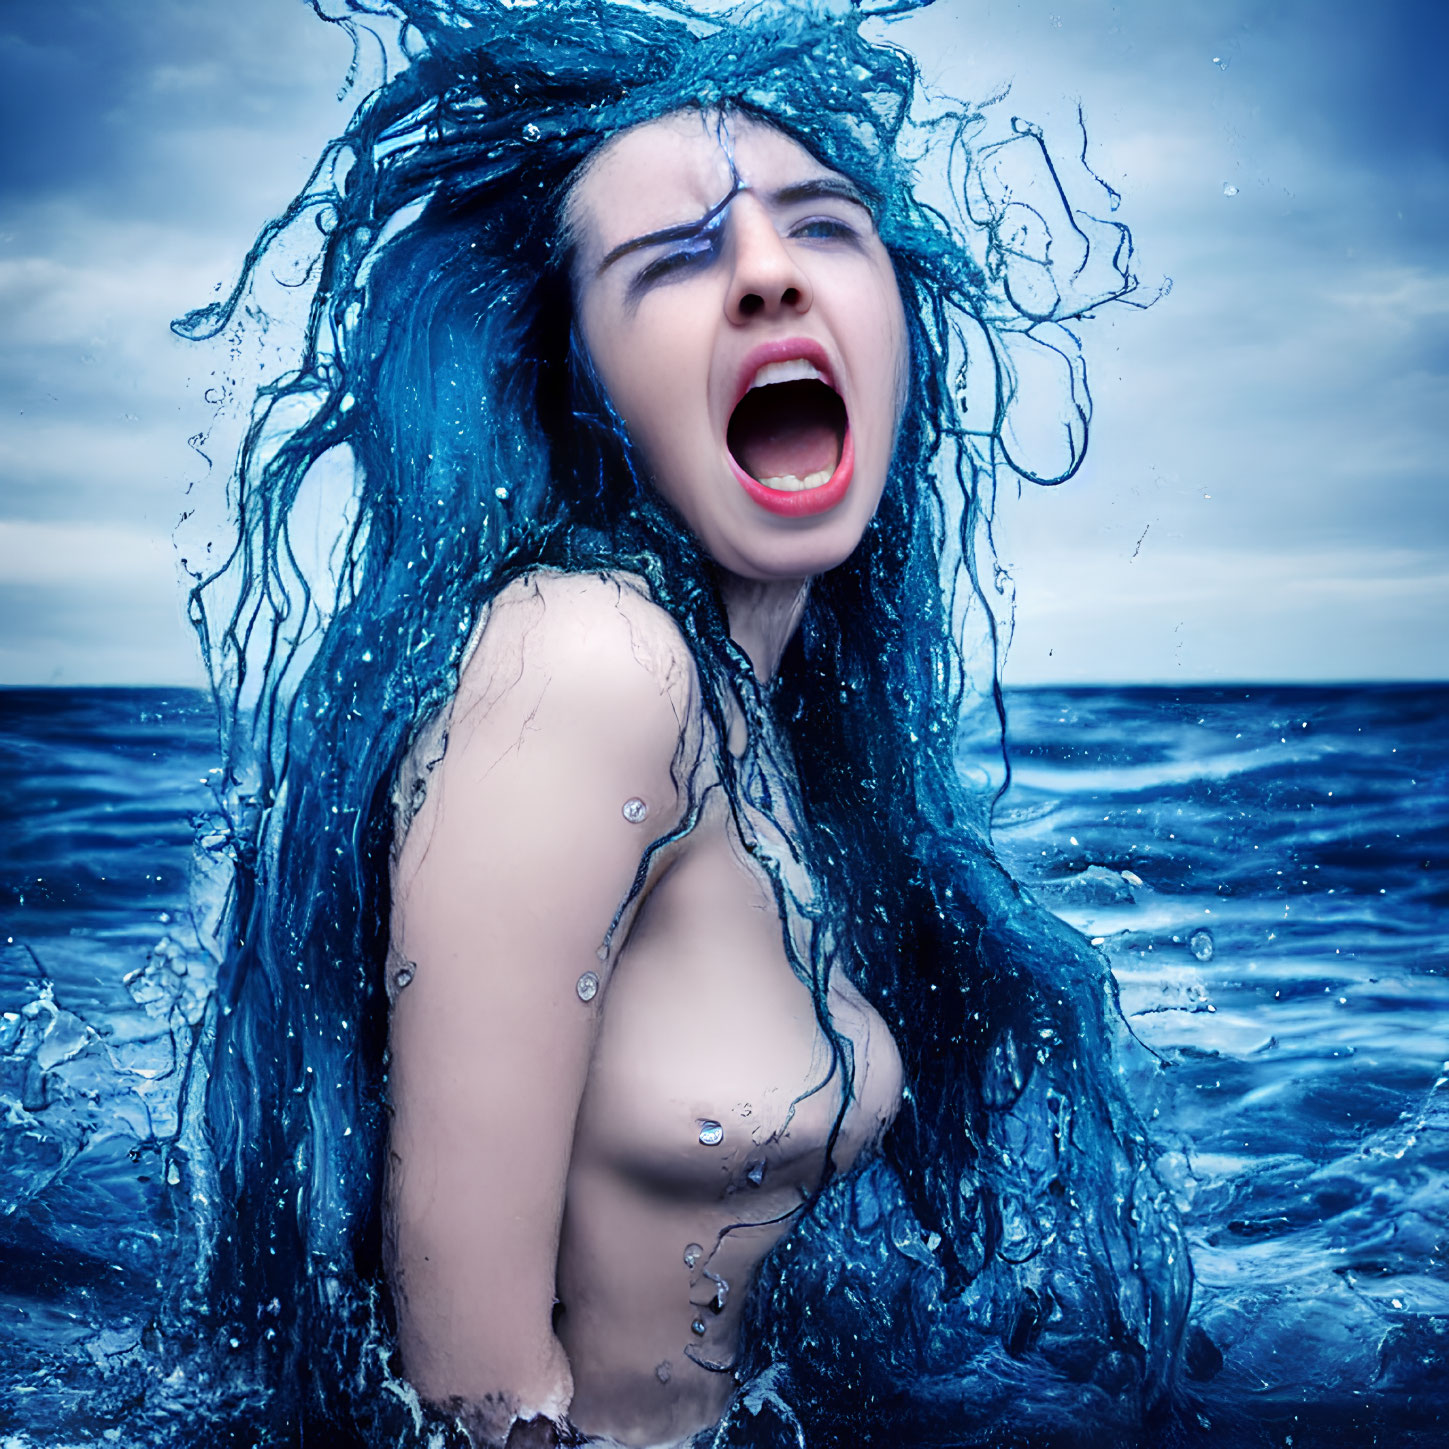 Blue-haired woman emerging from water with dynamic splashes